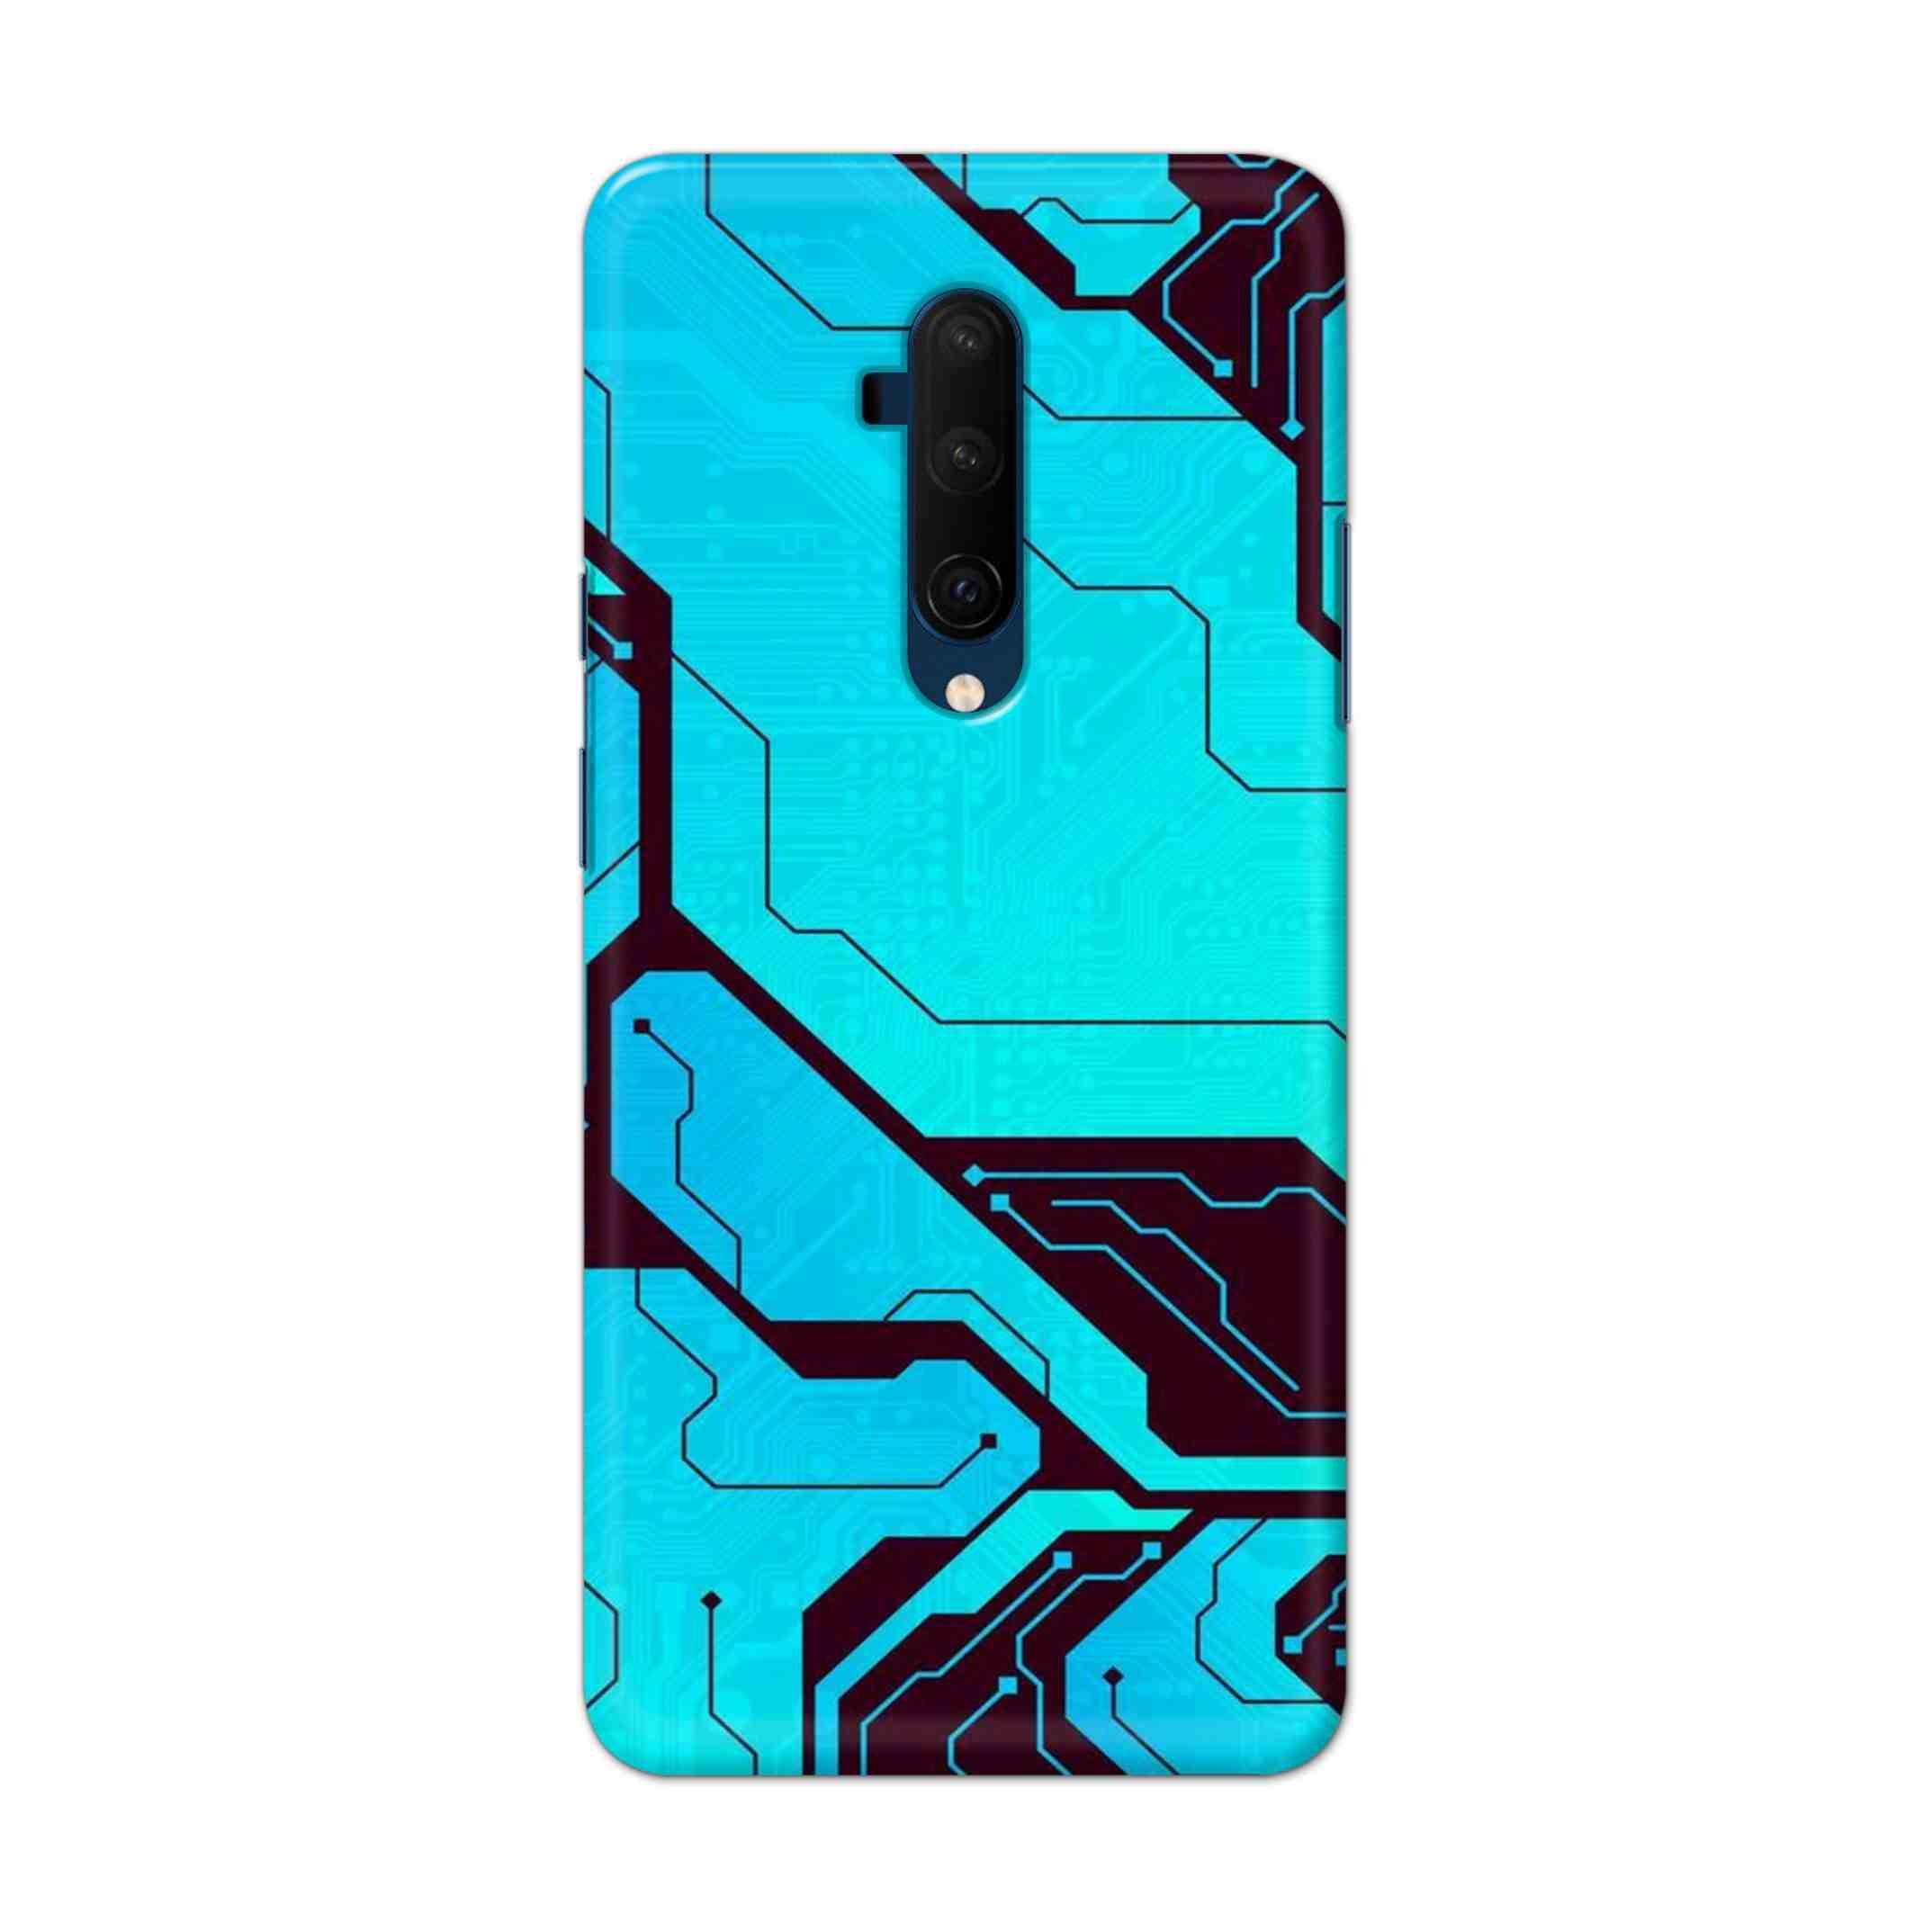 Buy Futuristic Line Hard Back Mobile Phone Case Cover For OnePlus 7T Pro Online